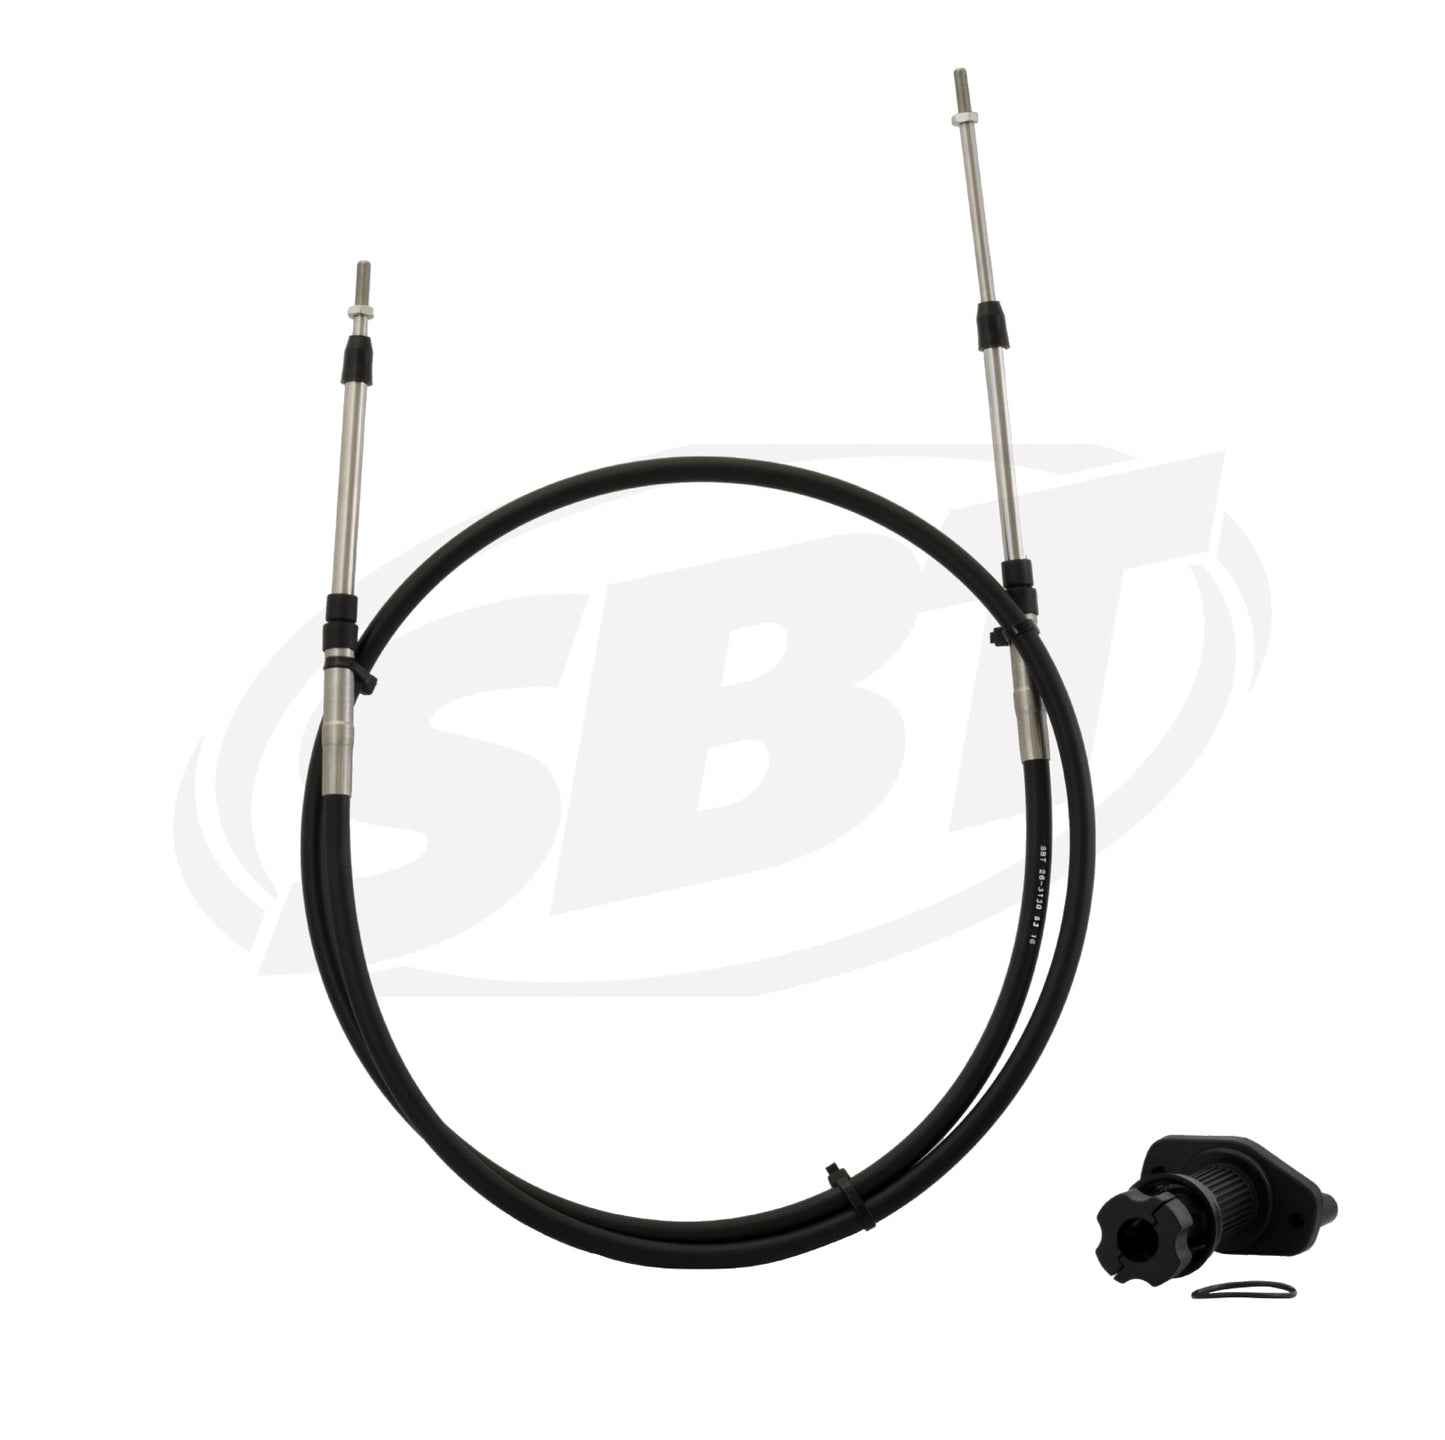 SBT Sea-Doo Steering Cable for Spark 277001790